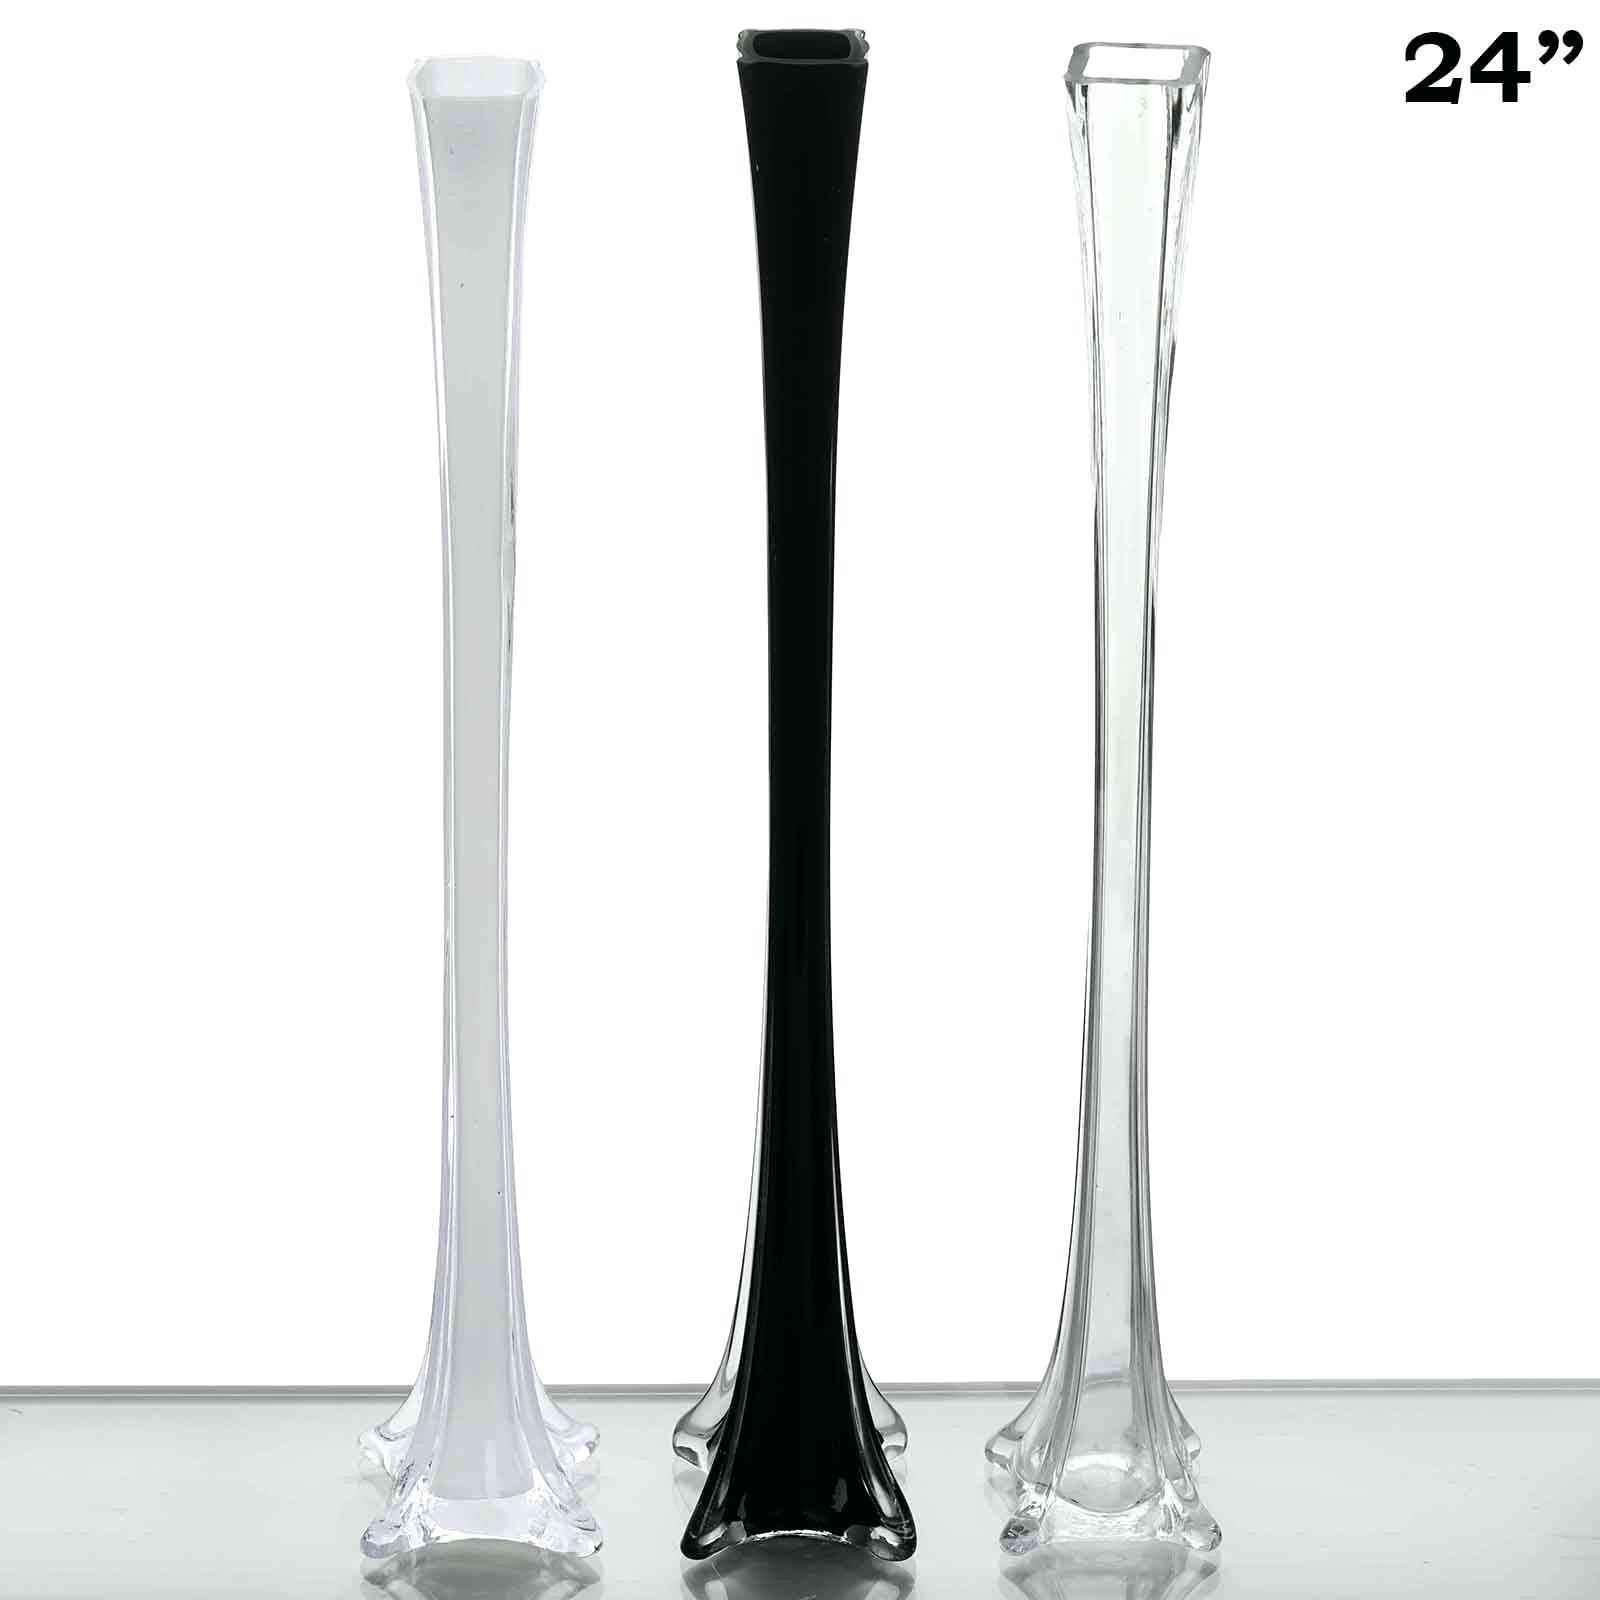 28 Spectacular Small Black Vase 2024 free download small black vase of fantastic chair decor ideas from living room vases wholesale awesome for fantastic chair decor ideas from living room vases wholesale awesome cheap glass vases 1h vasesi 